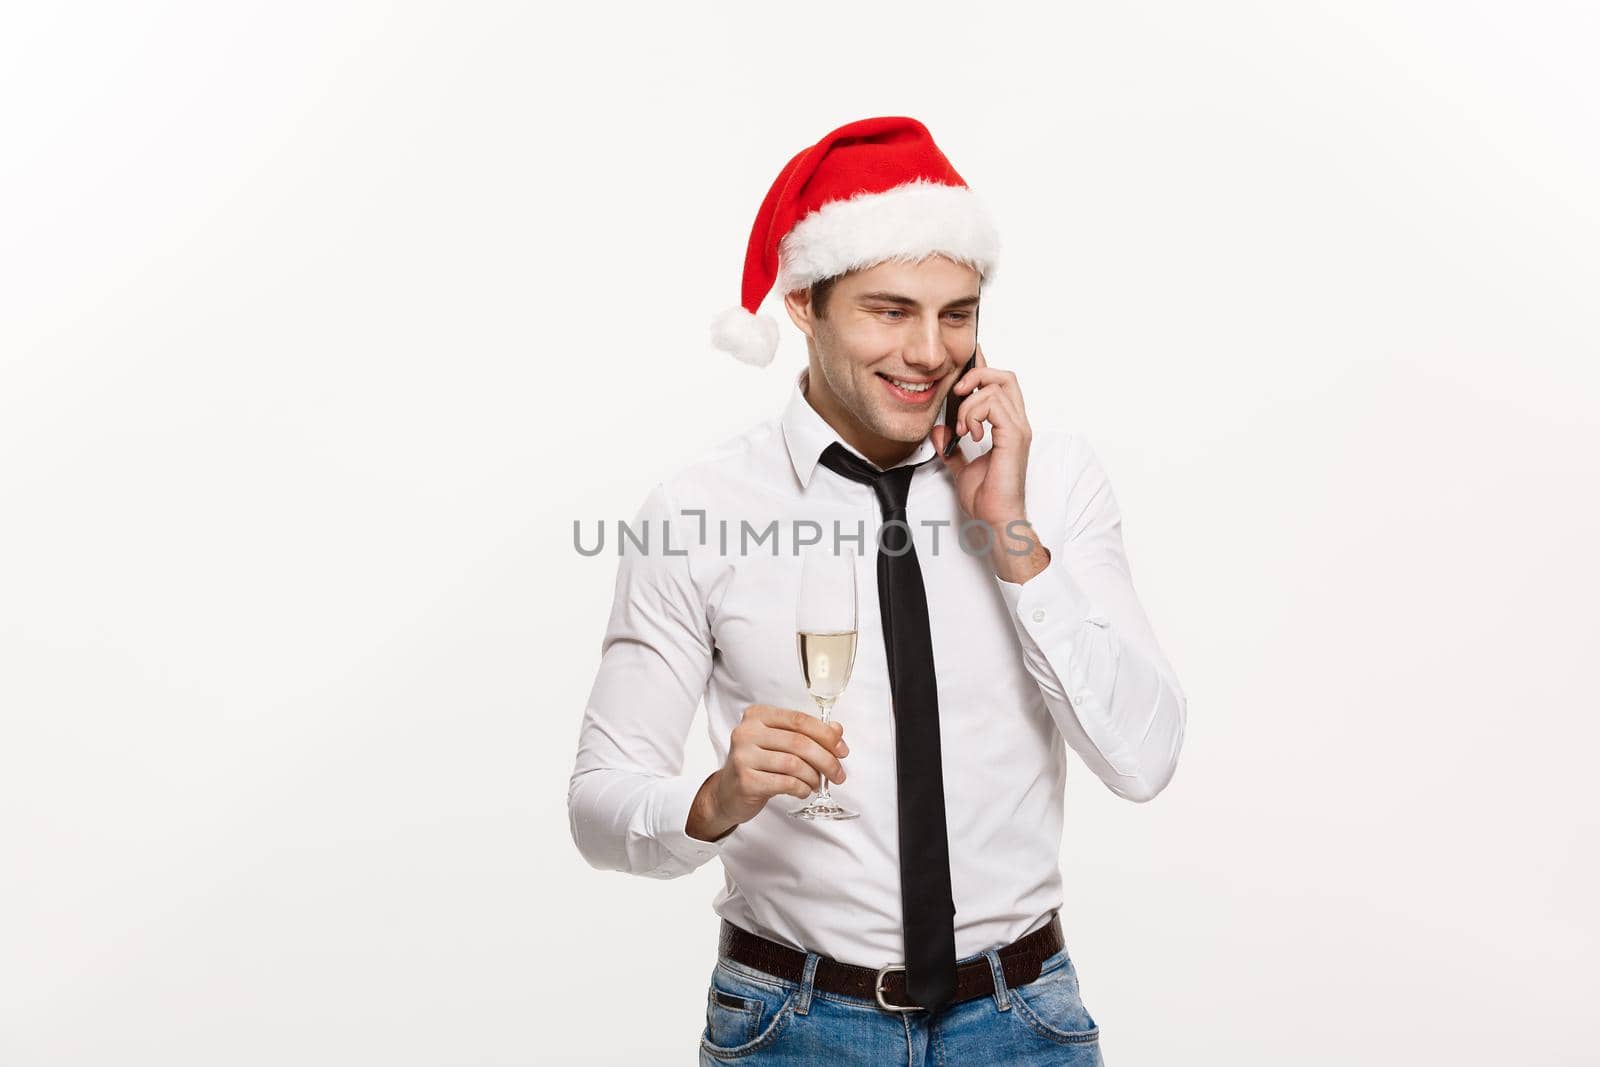 Christmas Concept - Handsome Business man talking on phone and holding glass of champange celebrating Chirstmas and New year.